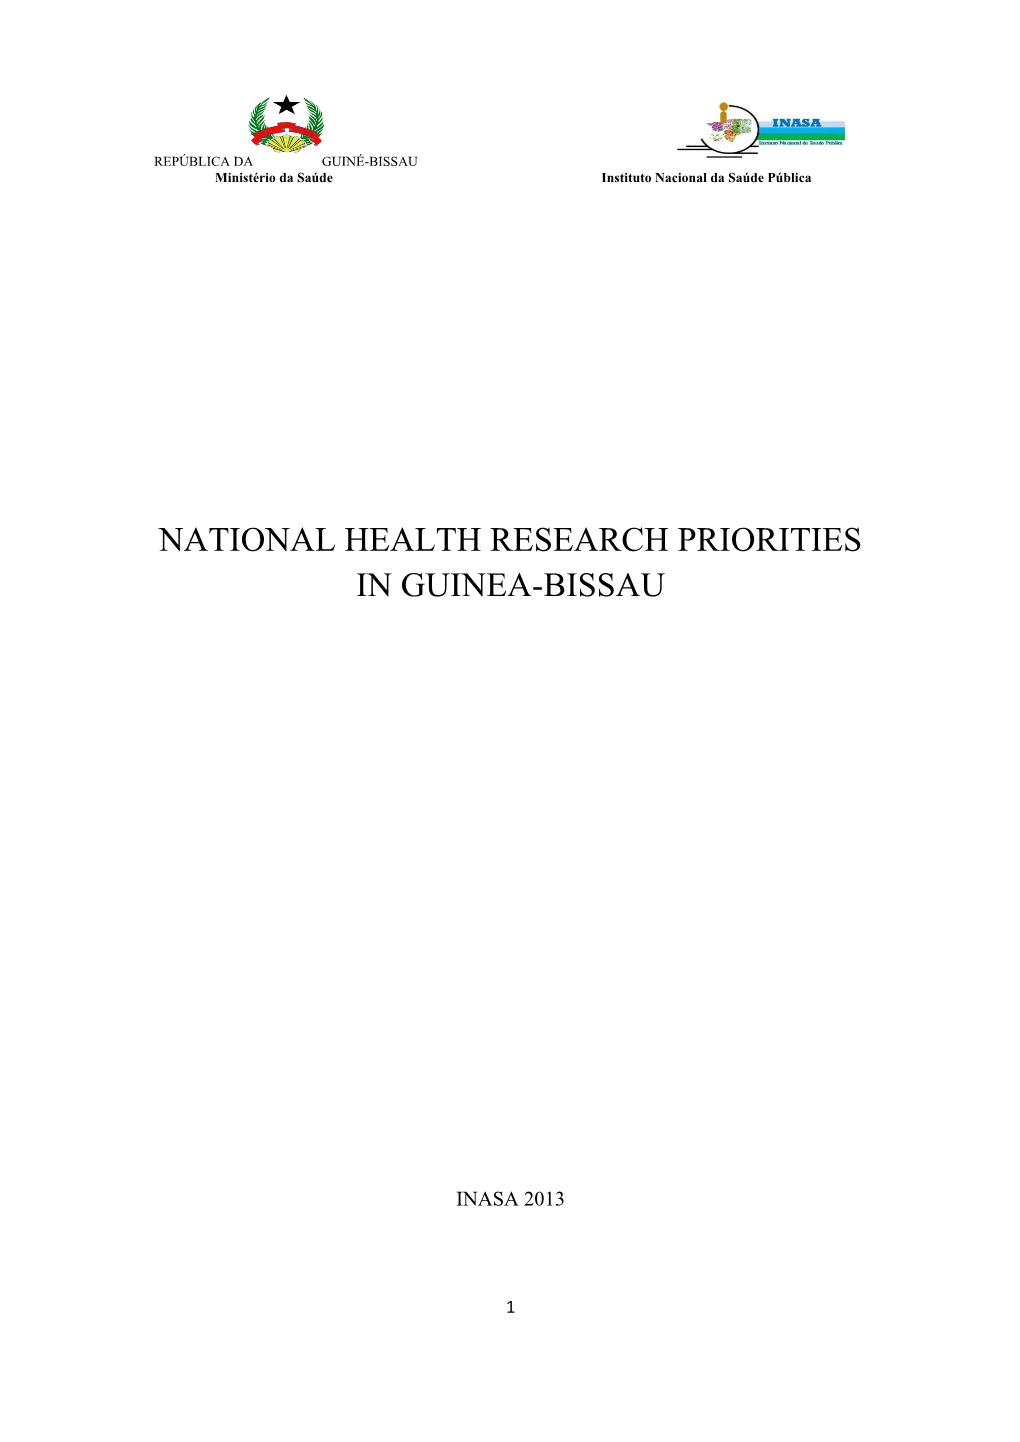 National Health Research Priorities in Guinea-Bissau